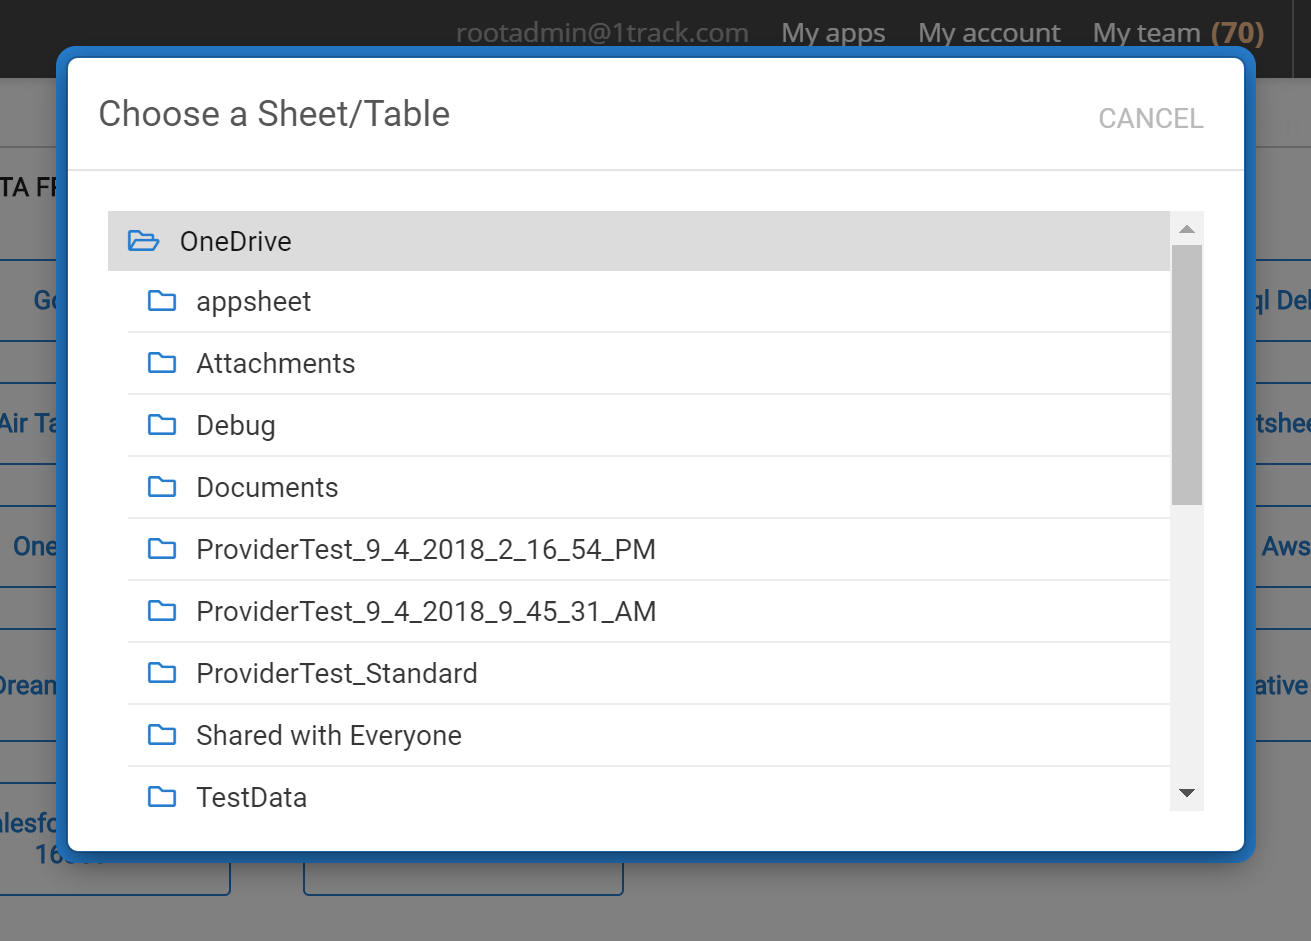 Choose a sheet or table dialog showing OneDrive